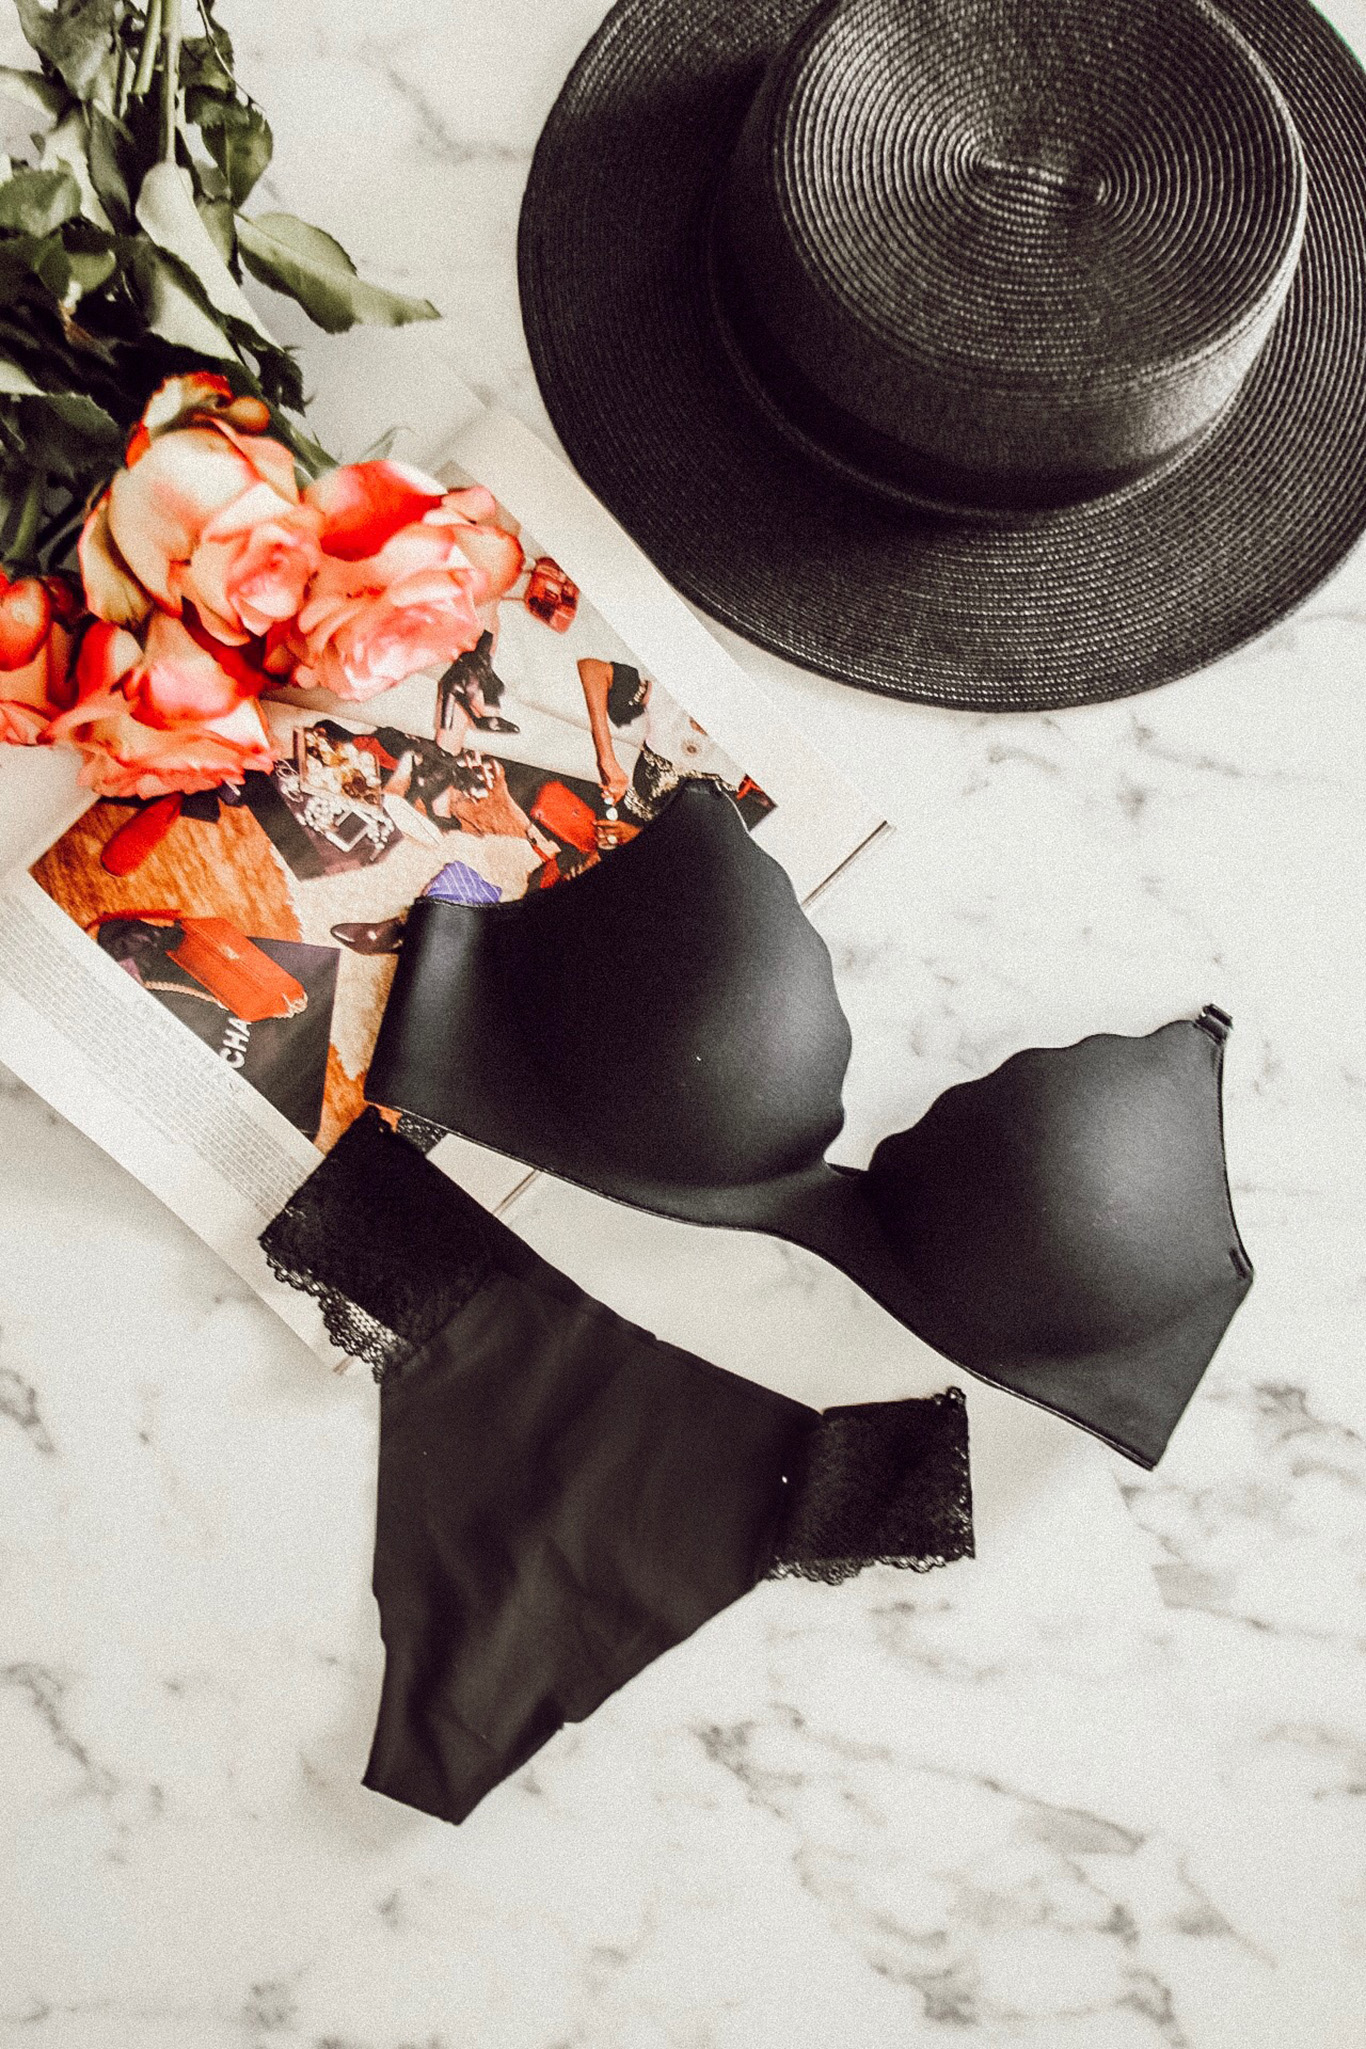 Alena Gidenko of todarpints.com shares her favorite bra and panties and how important it is to find the perfect, comfy fit